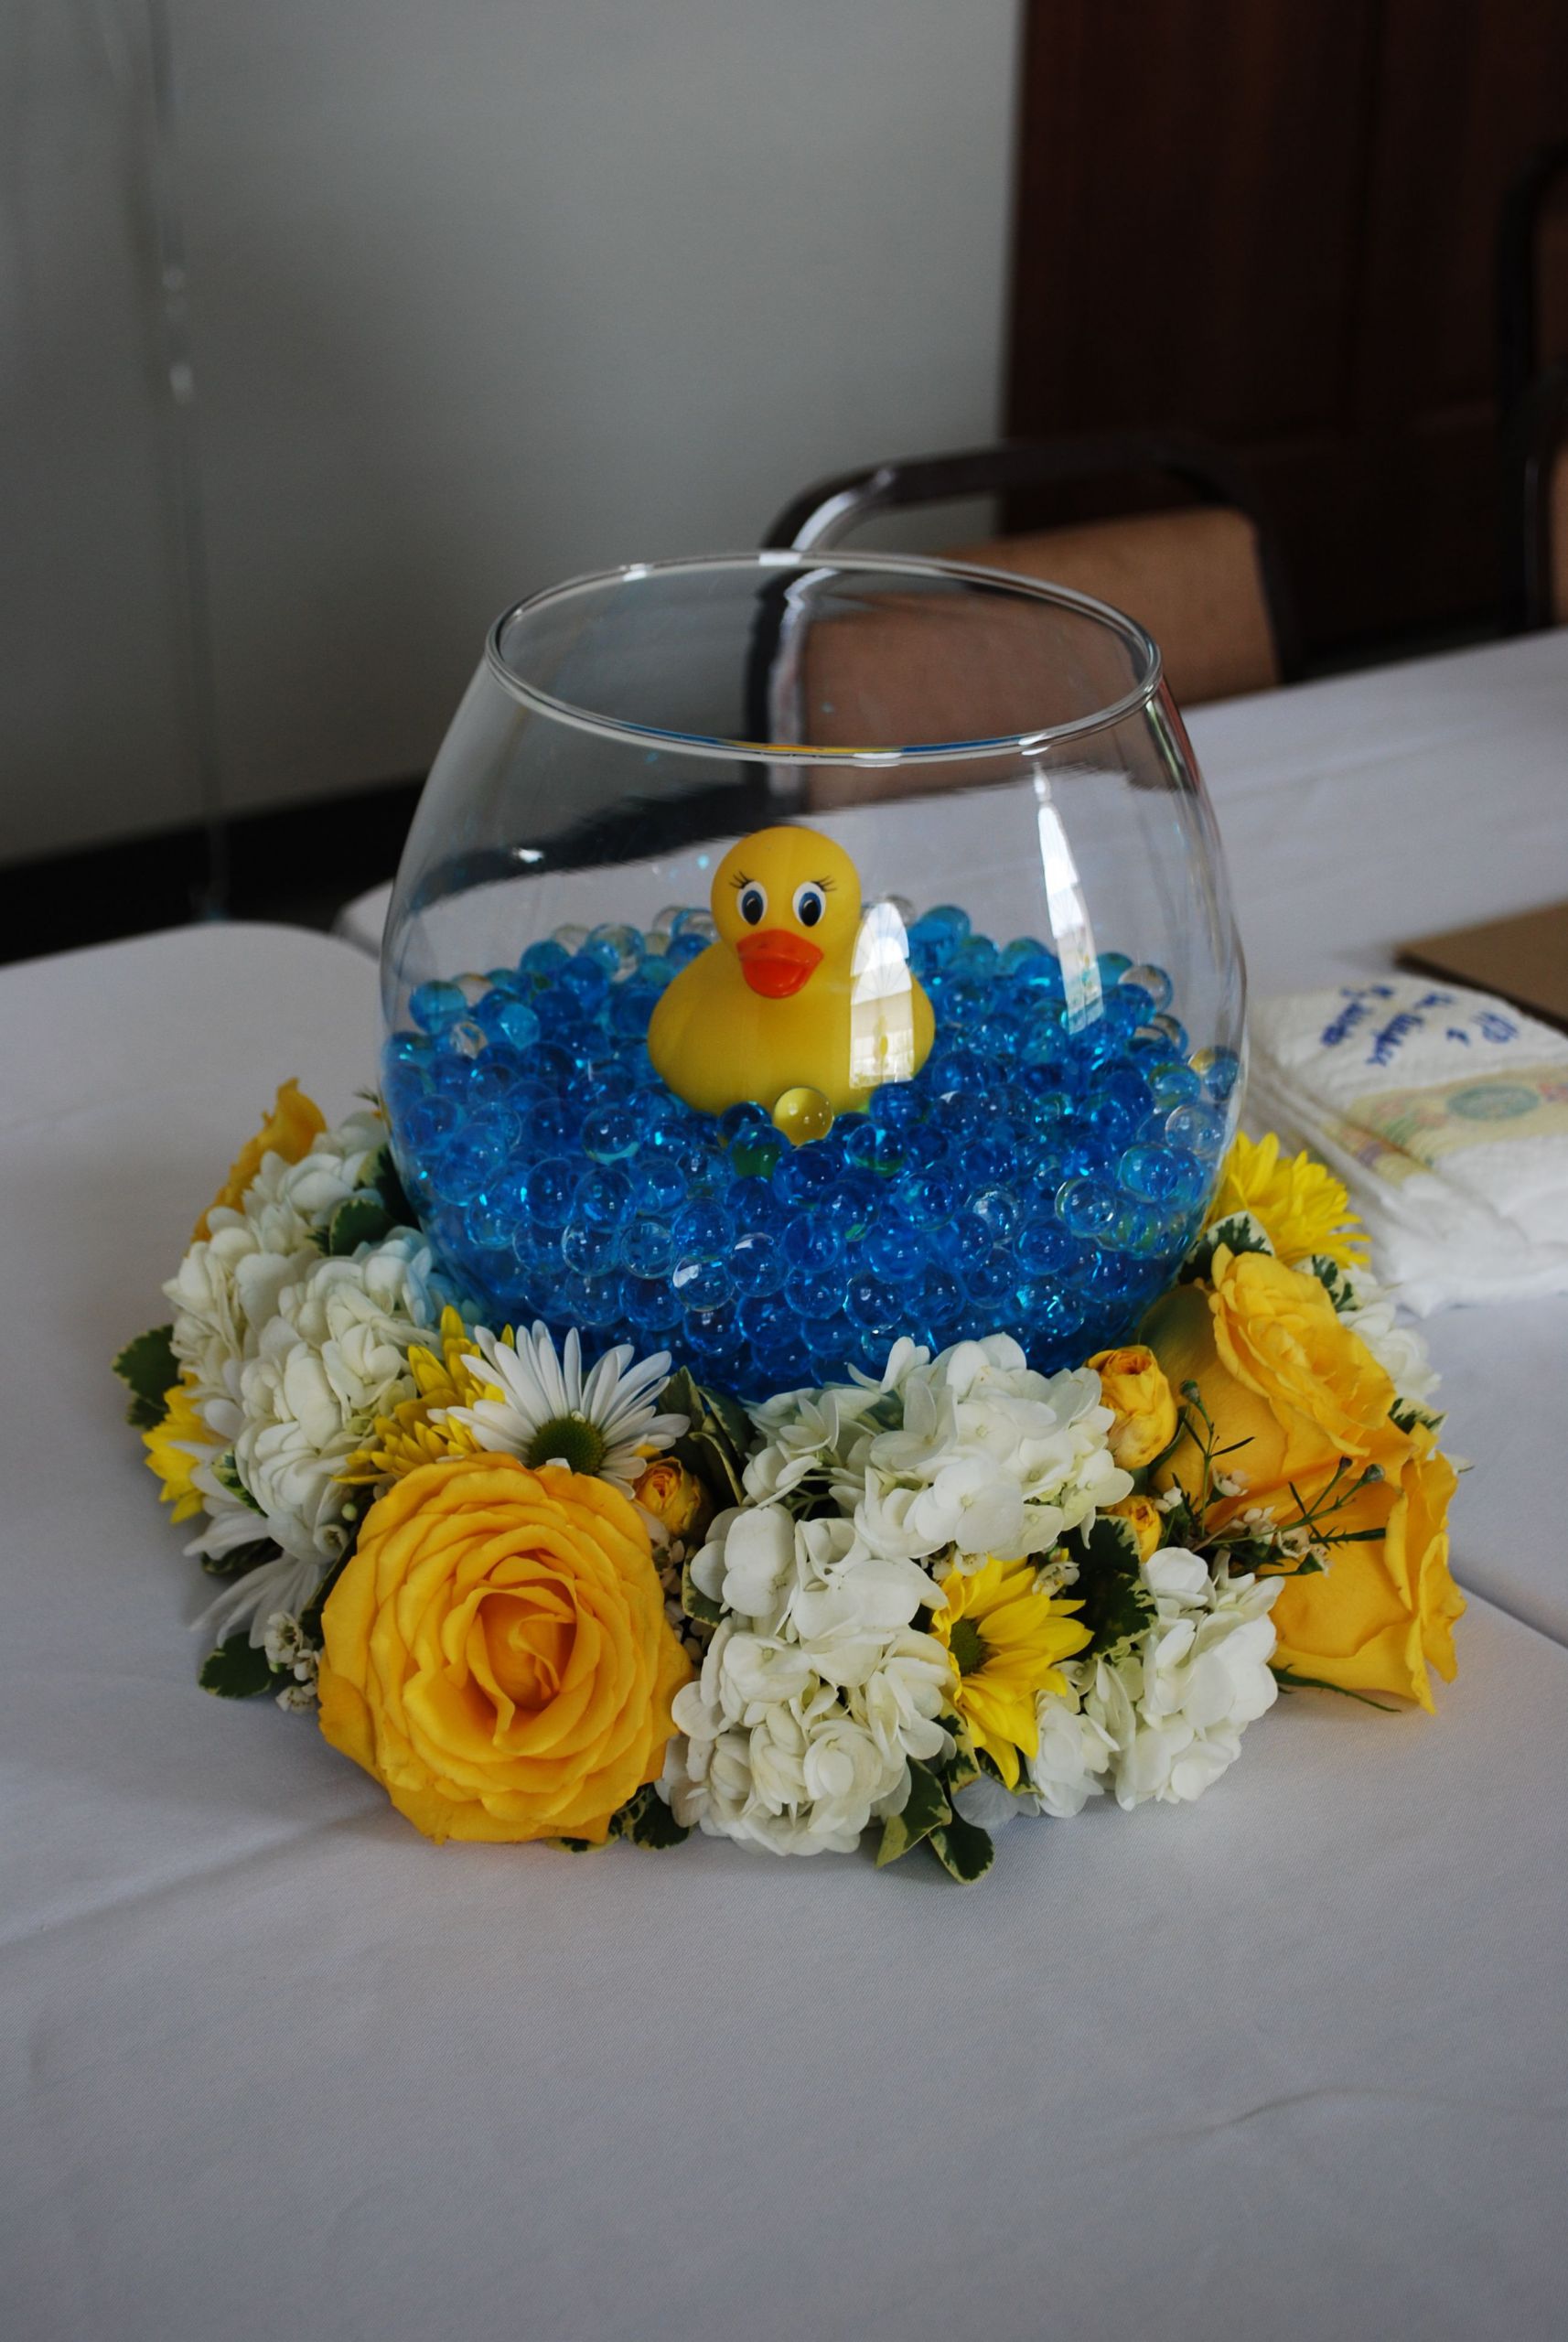 Rubber Ducky Baby Shower Decorations Ideas
 Baby Shower Rubber Duck Centerpieces My centerpieces for